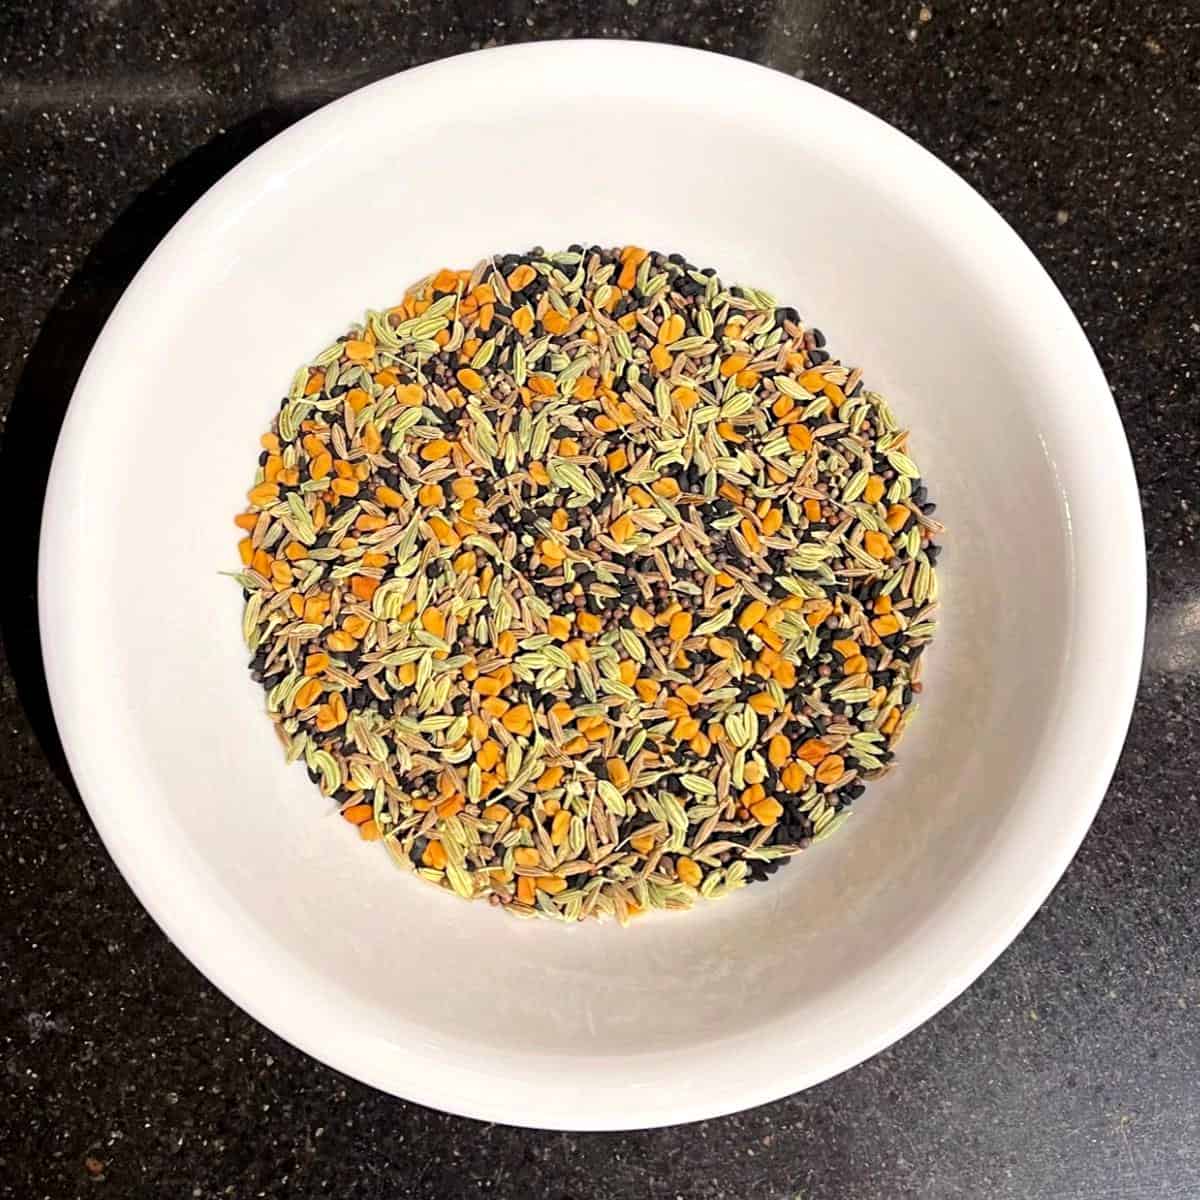 Panch phoron spice blend mixed in white bowl.